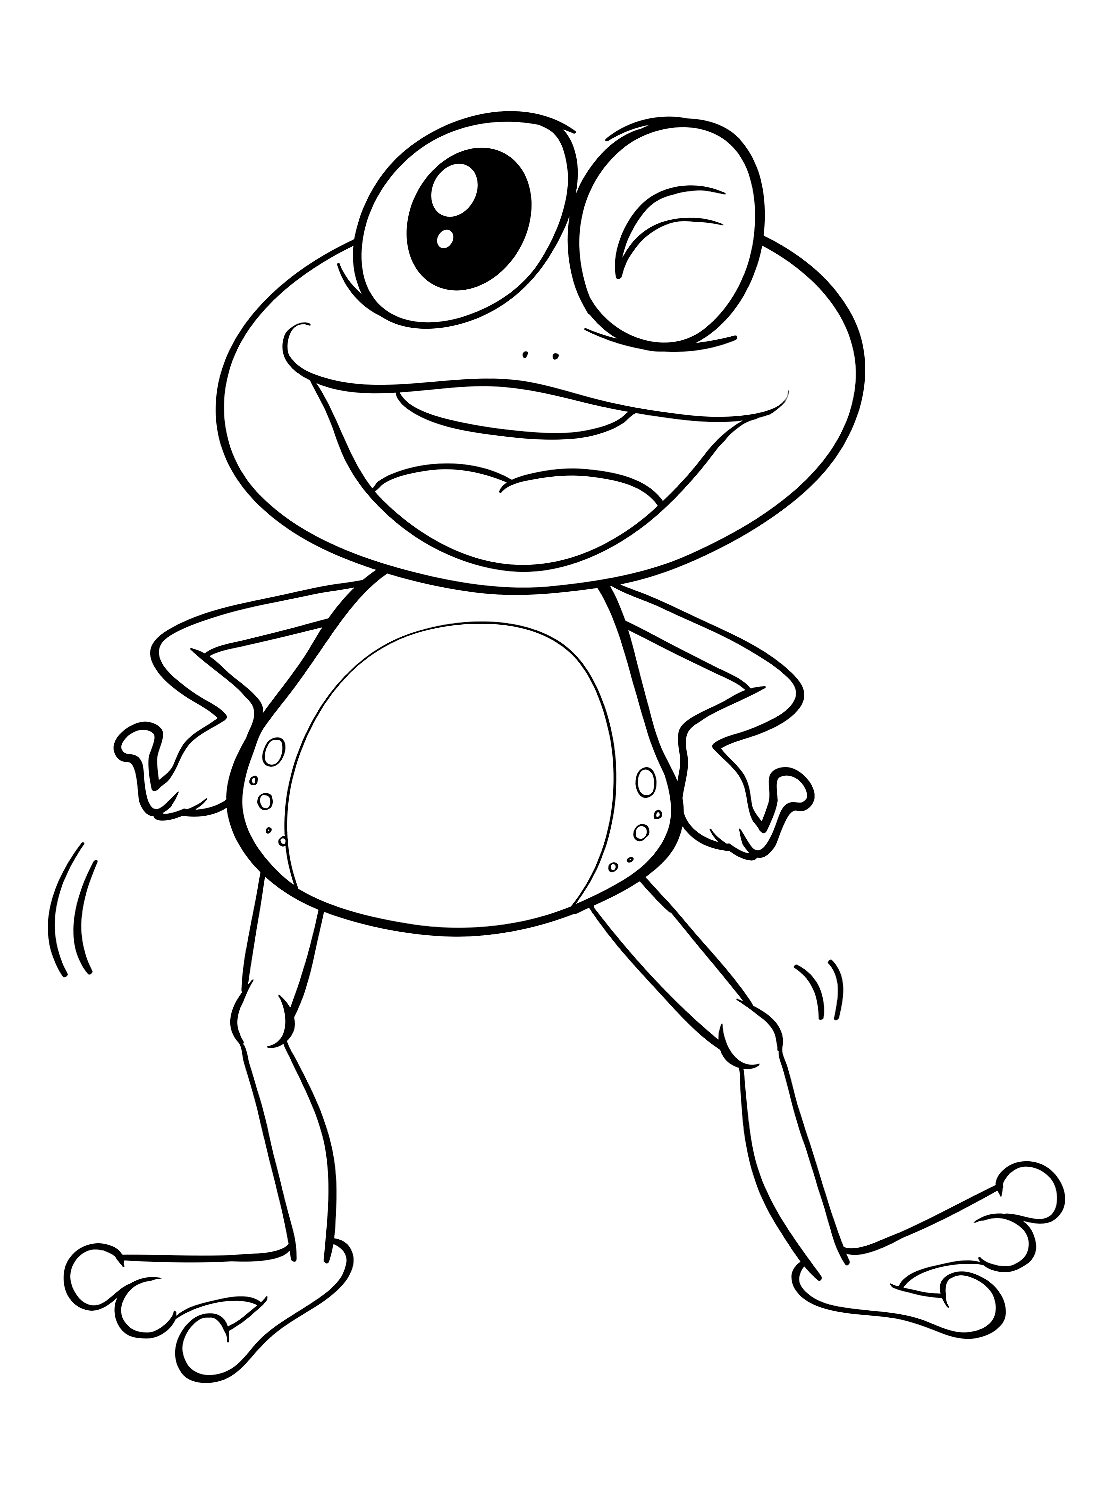 Coloring page frog from Frog